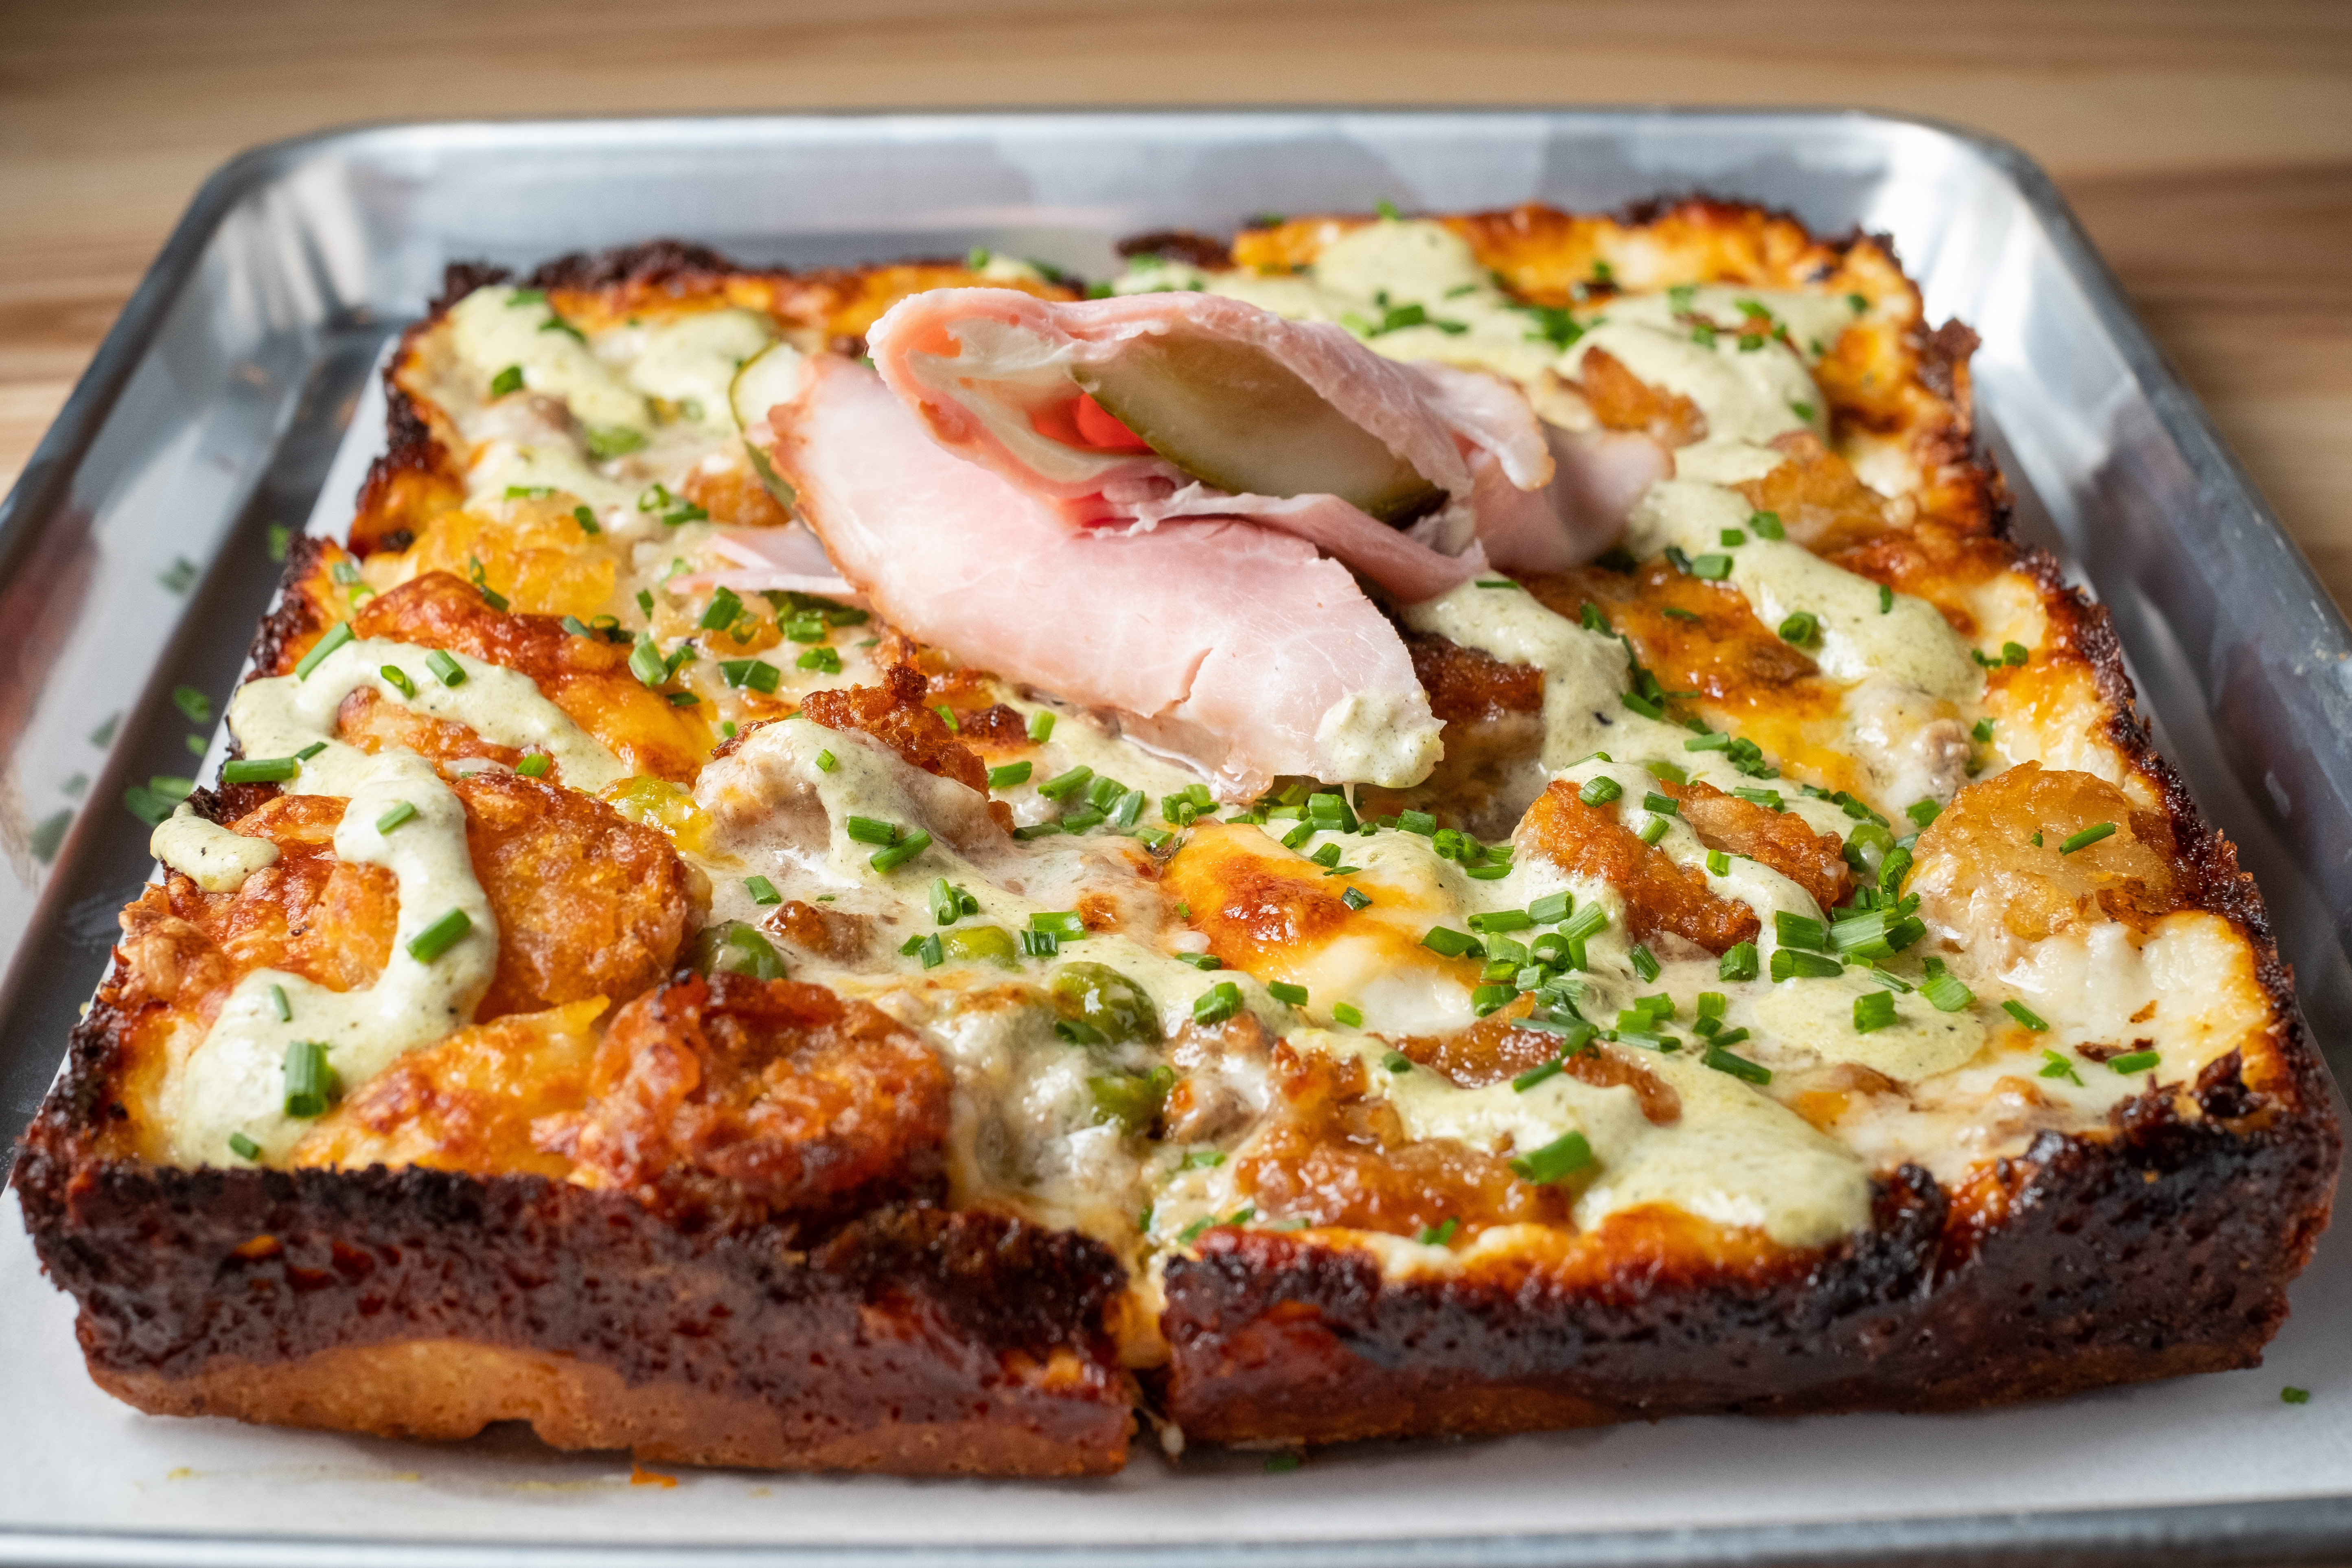 A rectangular pizza topped with tater tots, creamy sauce, an a pickle wrapped in ham garnish